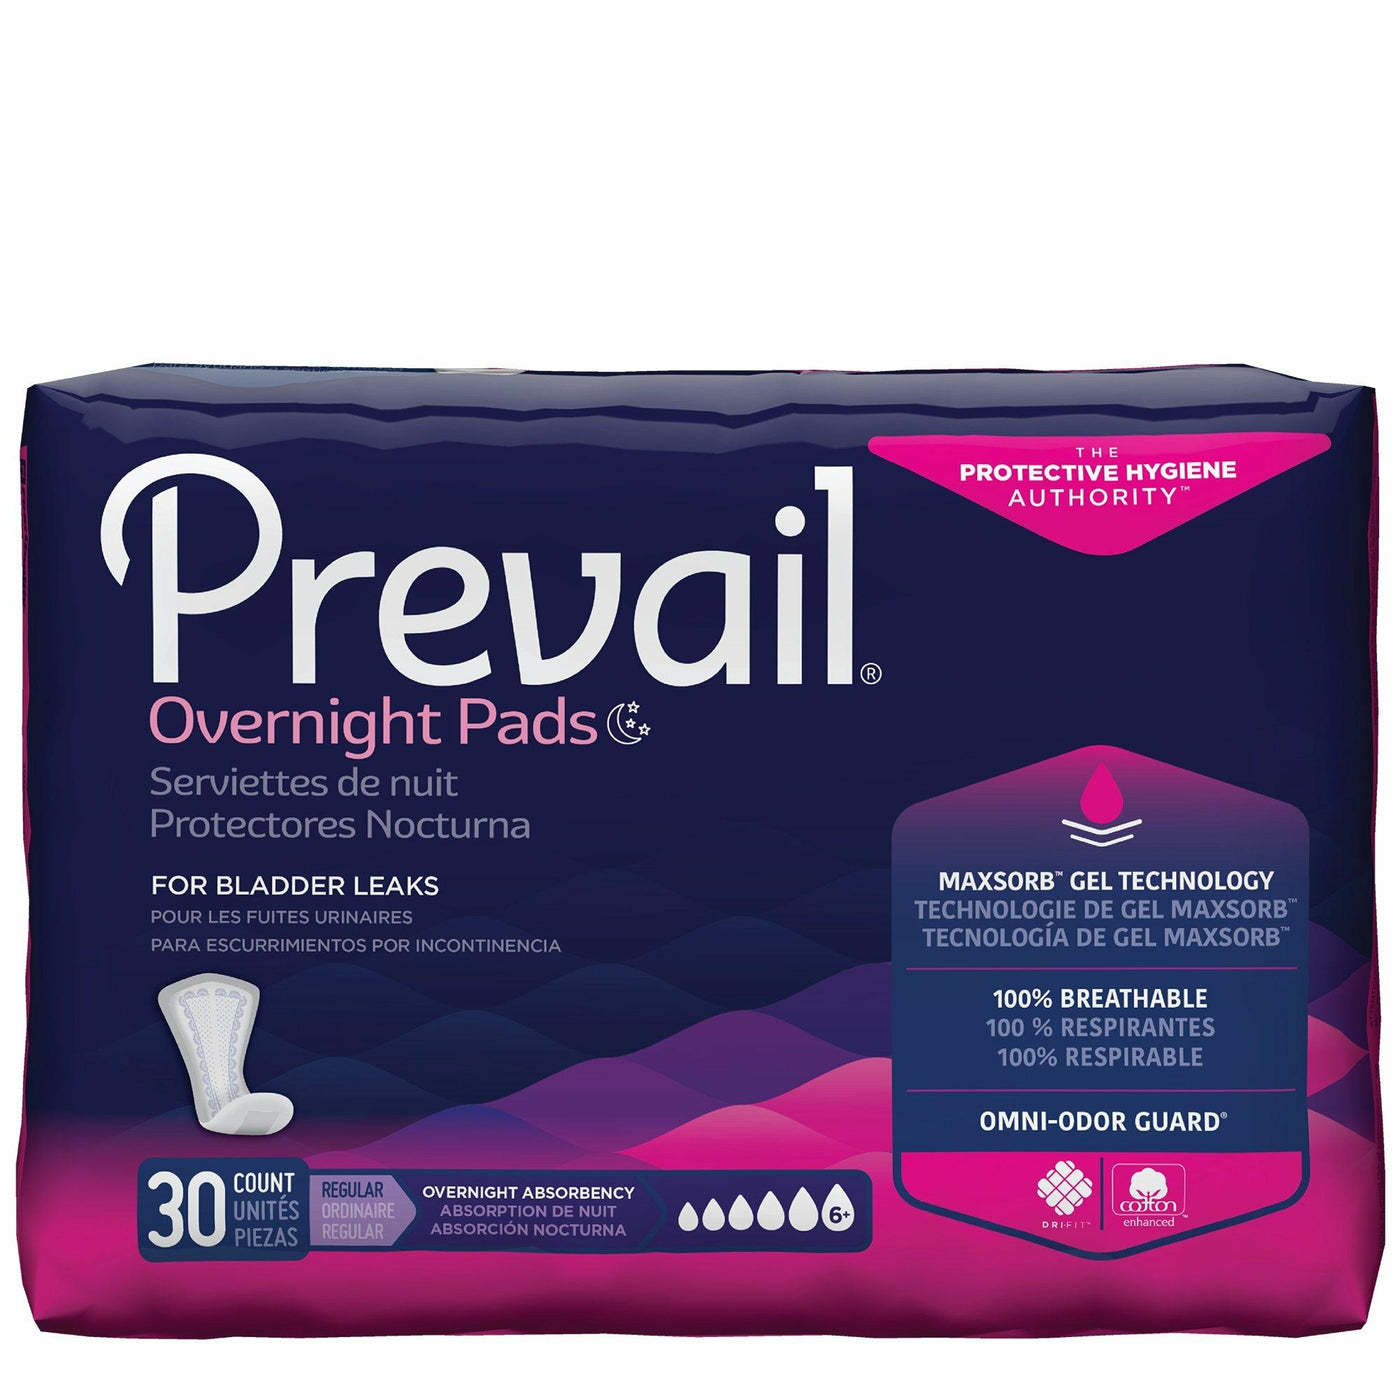 Prevail Women's Daily Incontinence Underwear, Maximum Absorbency